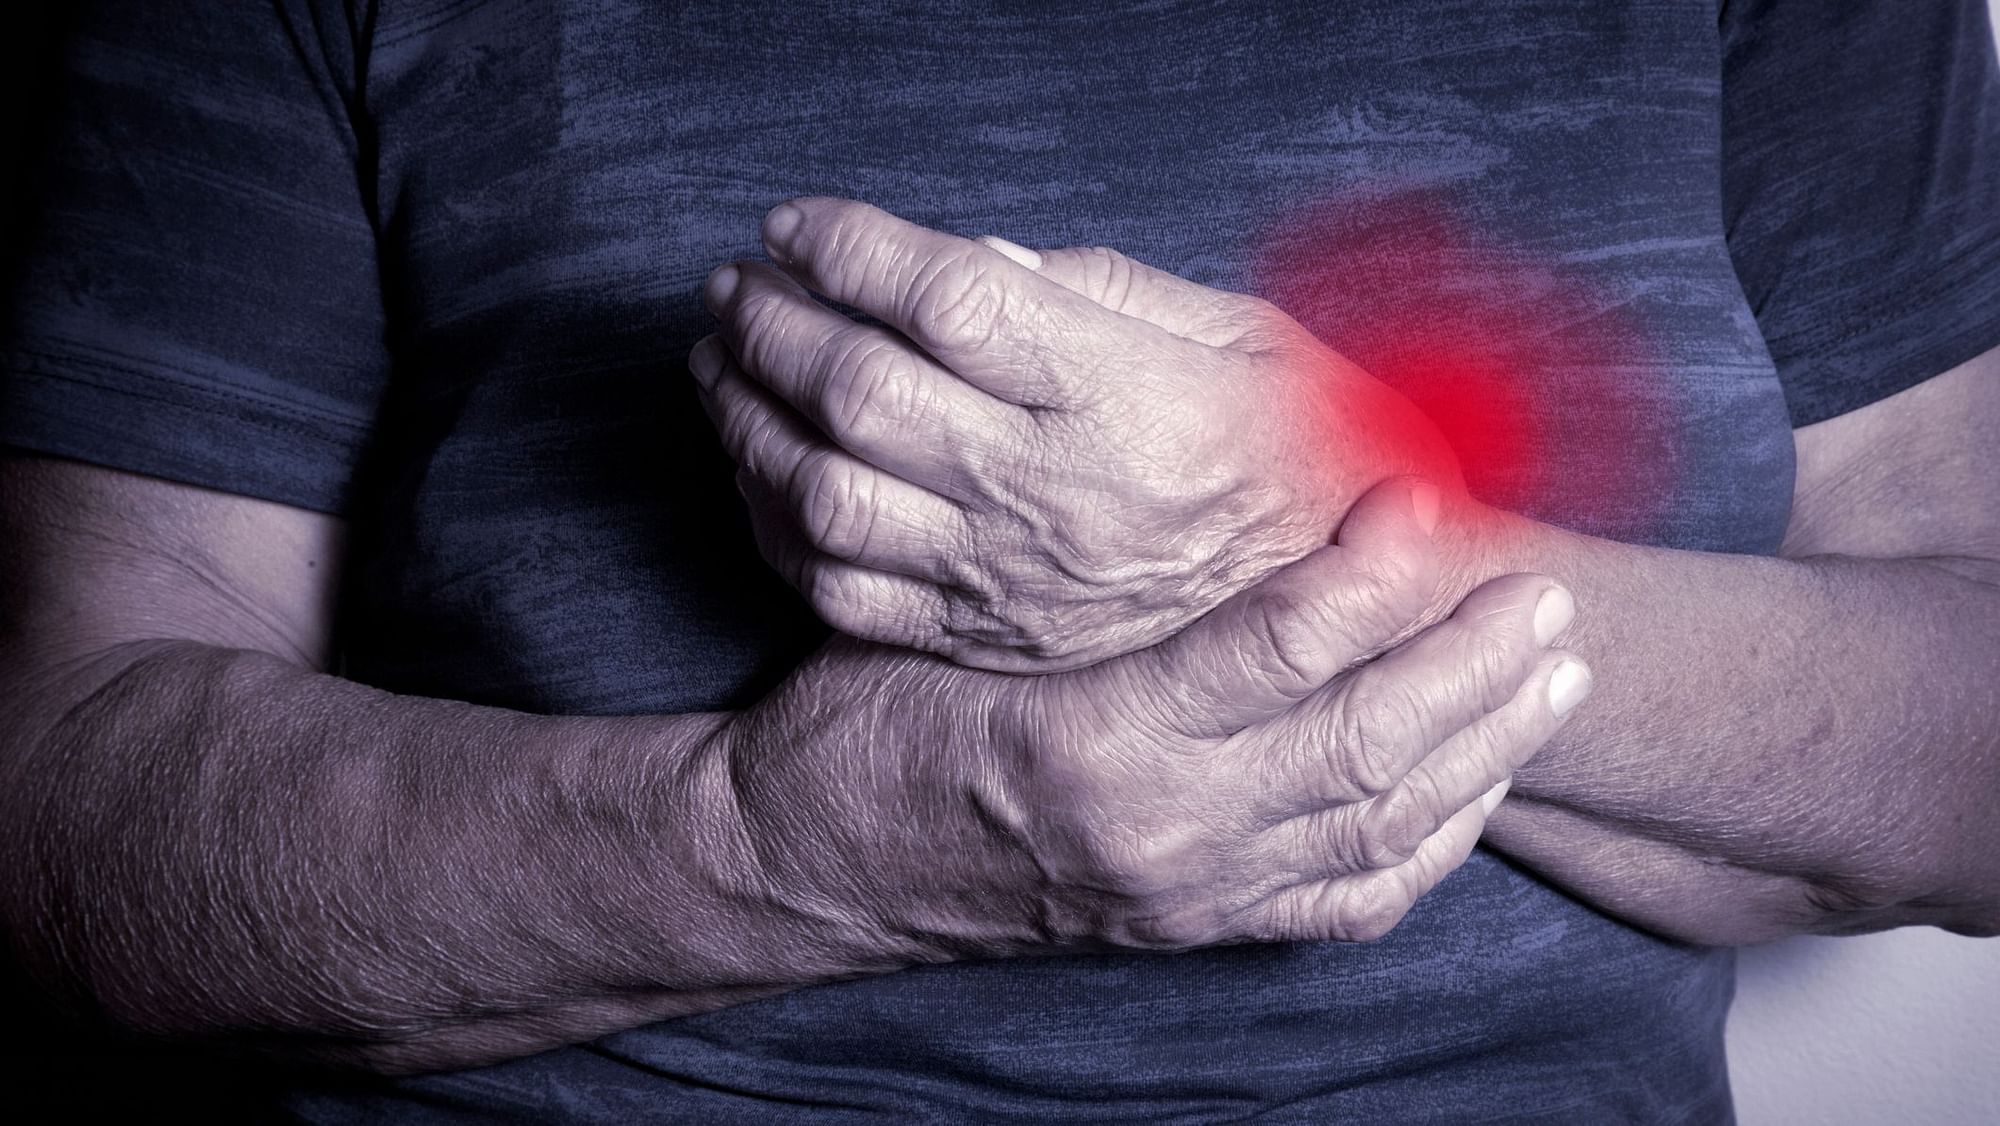 Scientists have uncovered 52 new genetic changes linked to osteoarthritis which they say may help develop new treatments for the disabling condition.